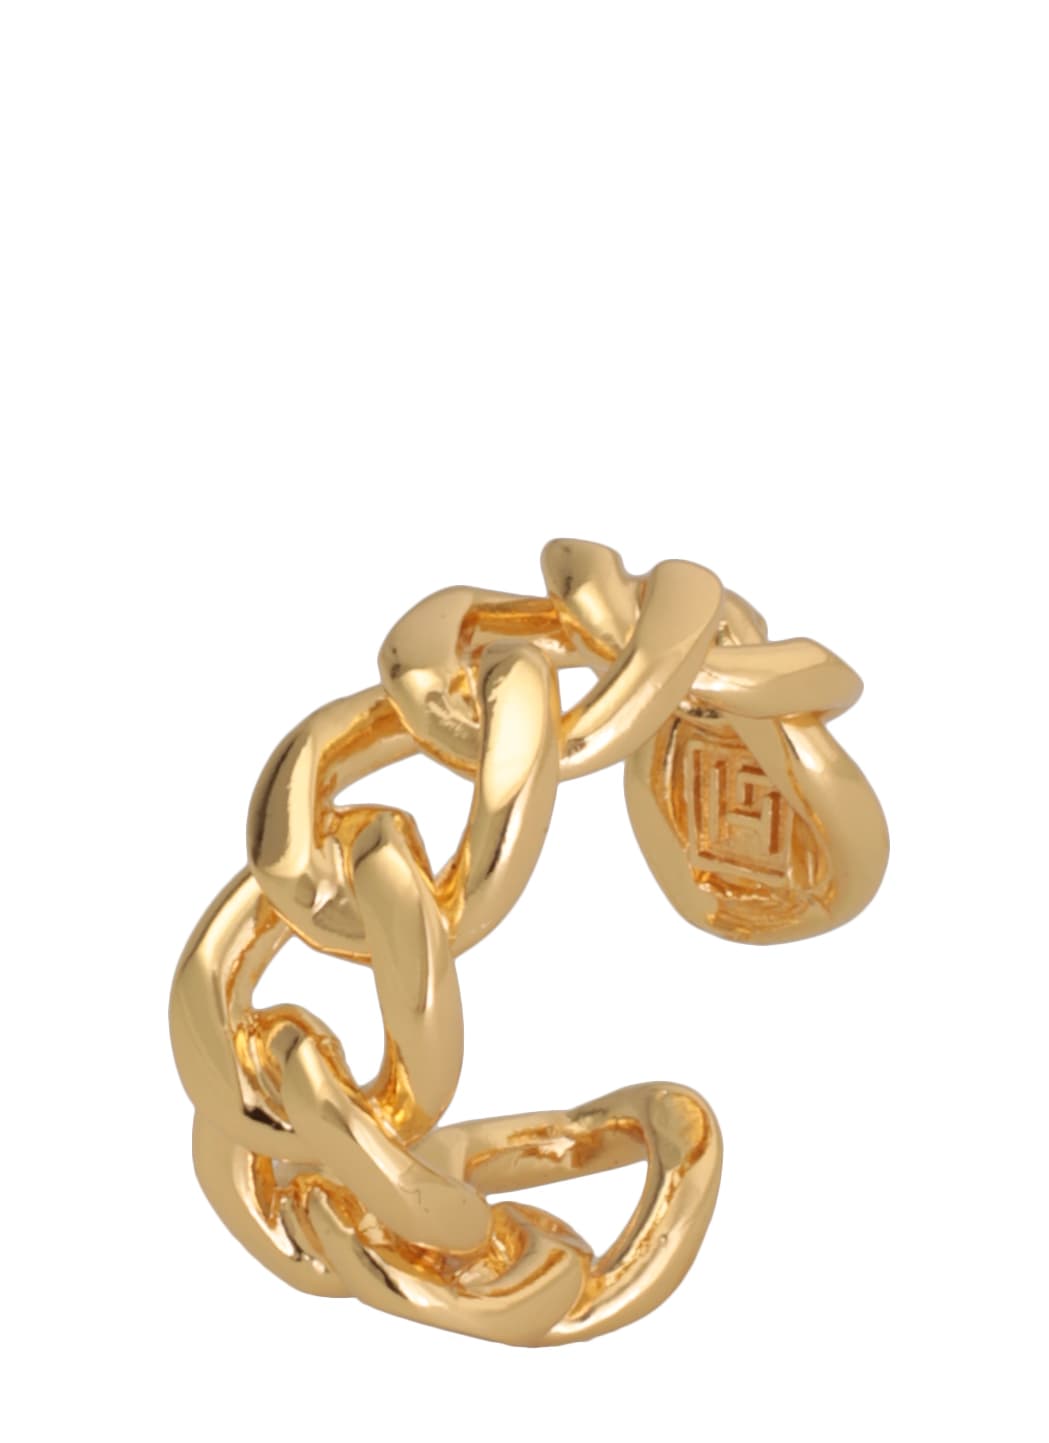 FEDERICA TOSI CHAIN RING,FT0110 RING CHAINGOLD